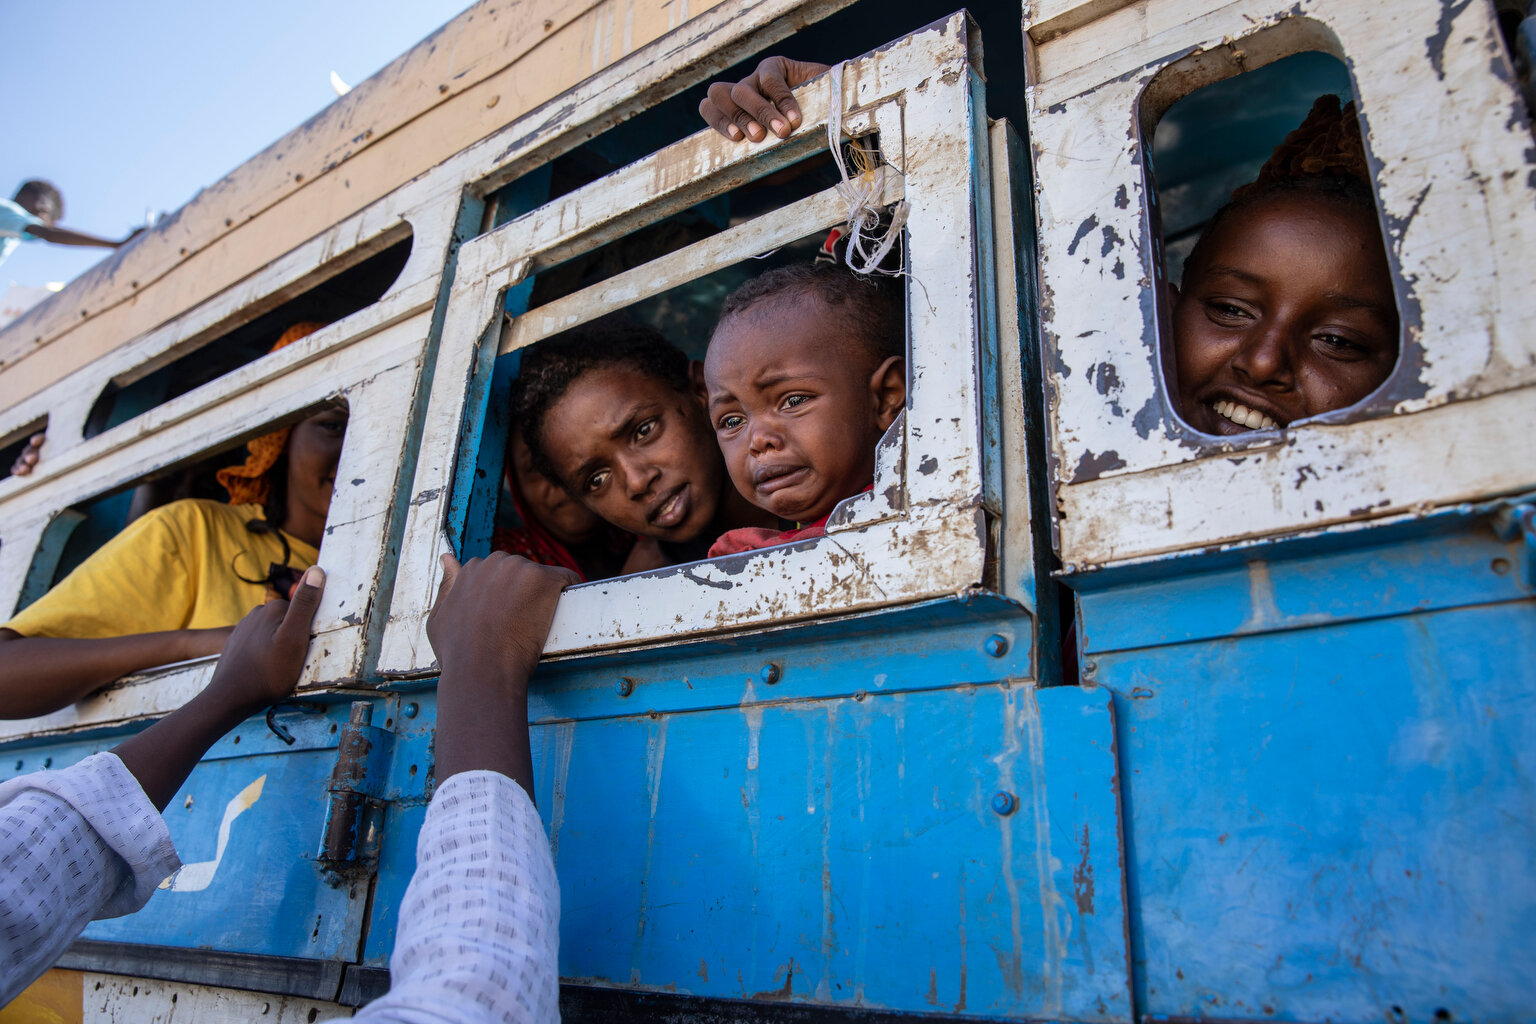  Tigray refugees who fled the conflict in the Ethiopia's Tigray ride a bus going to the Village 8 temporary shelter, near the Sudan-Ethiopia border, in Hamdayet, eastern Sudan, Tuesday, Dec. 1, 2020. (AP Photo/Nariman El-Mofty) 